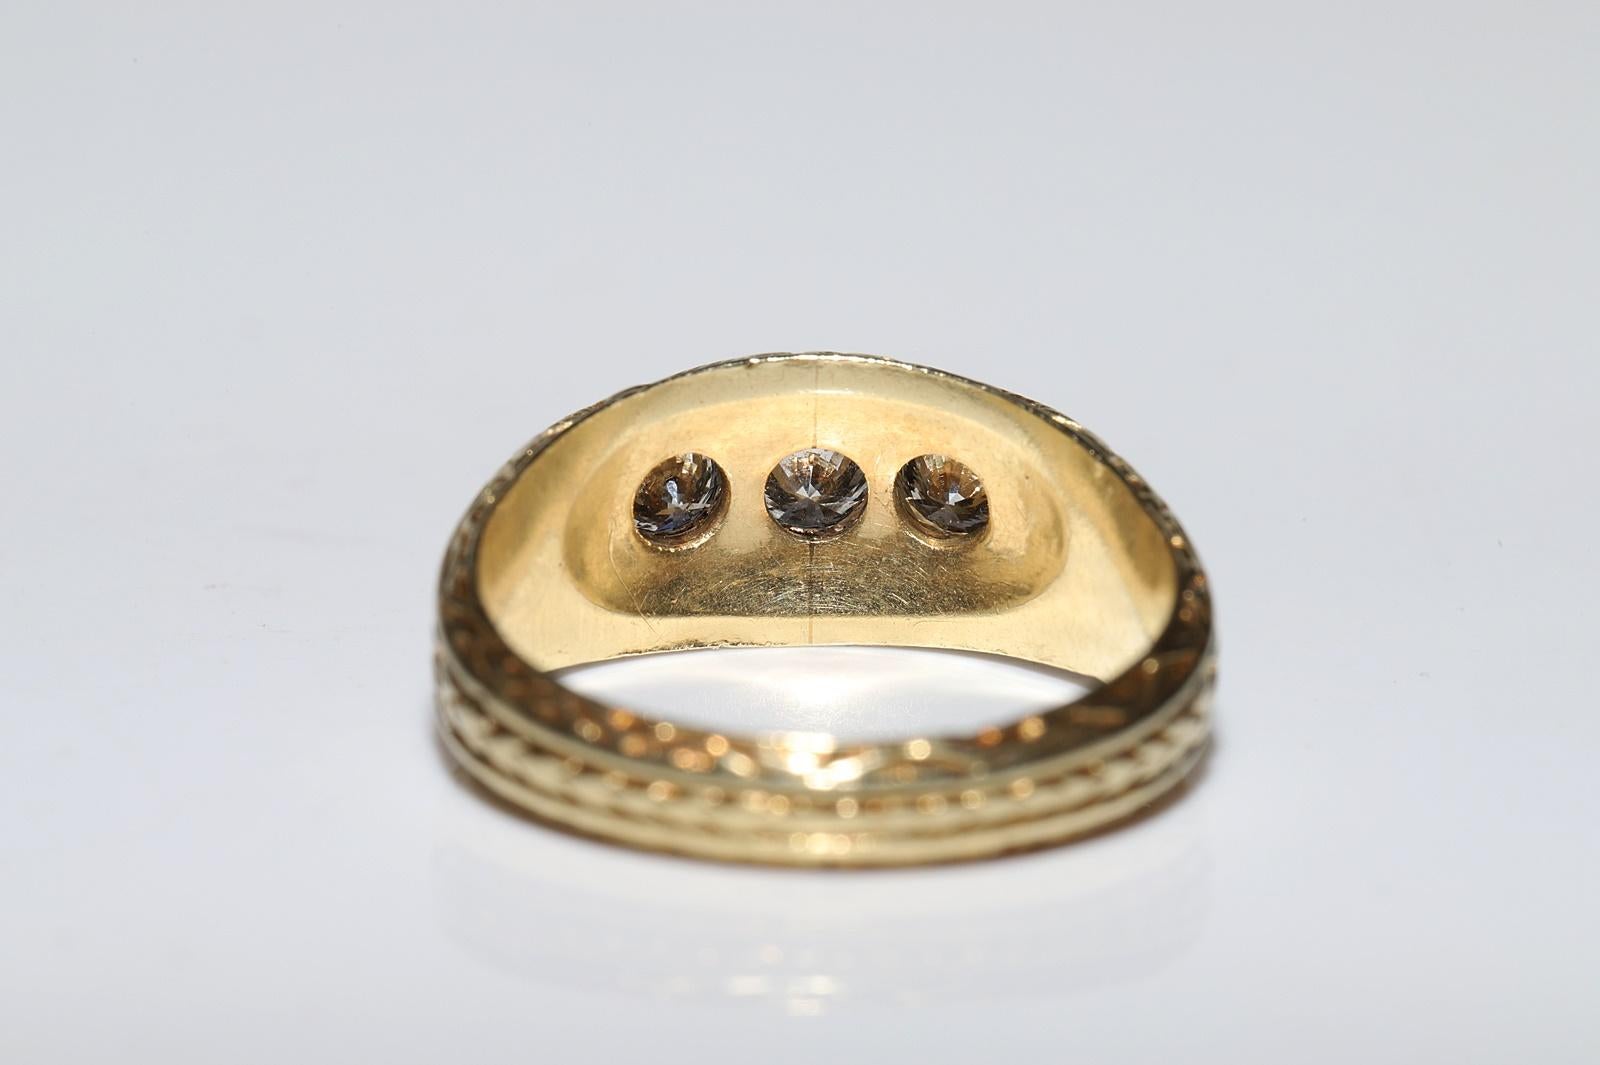 Antique Circa 1900s Handmade 14k Gold Natural Diamond Decorated Band Ring For Sale 3